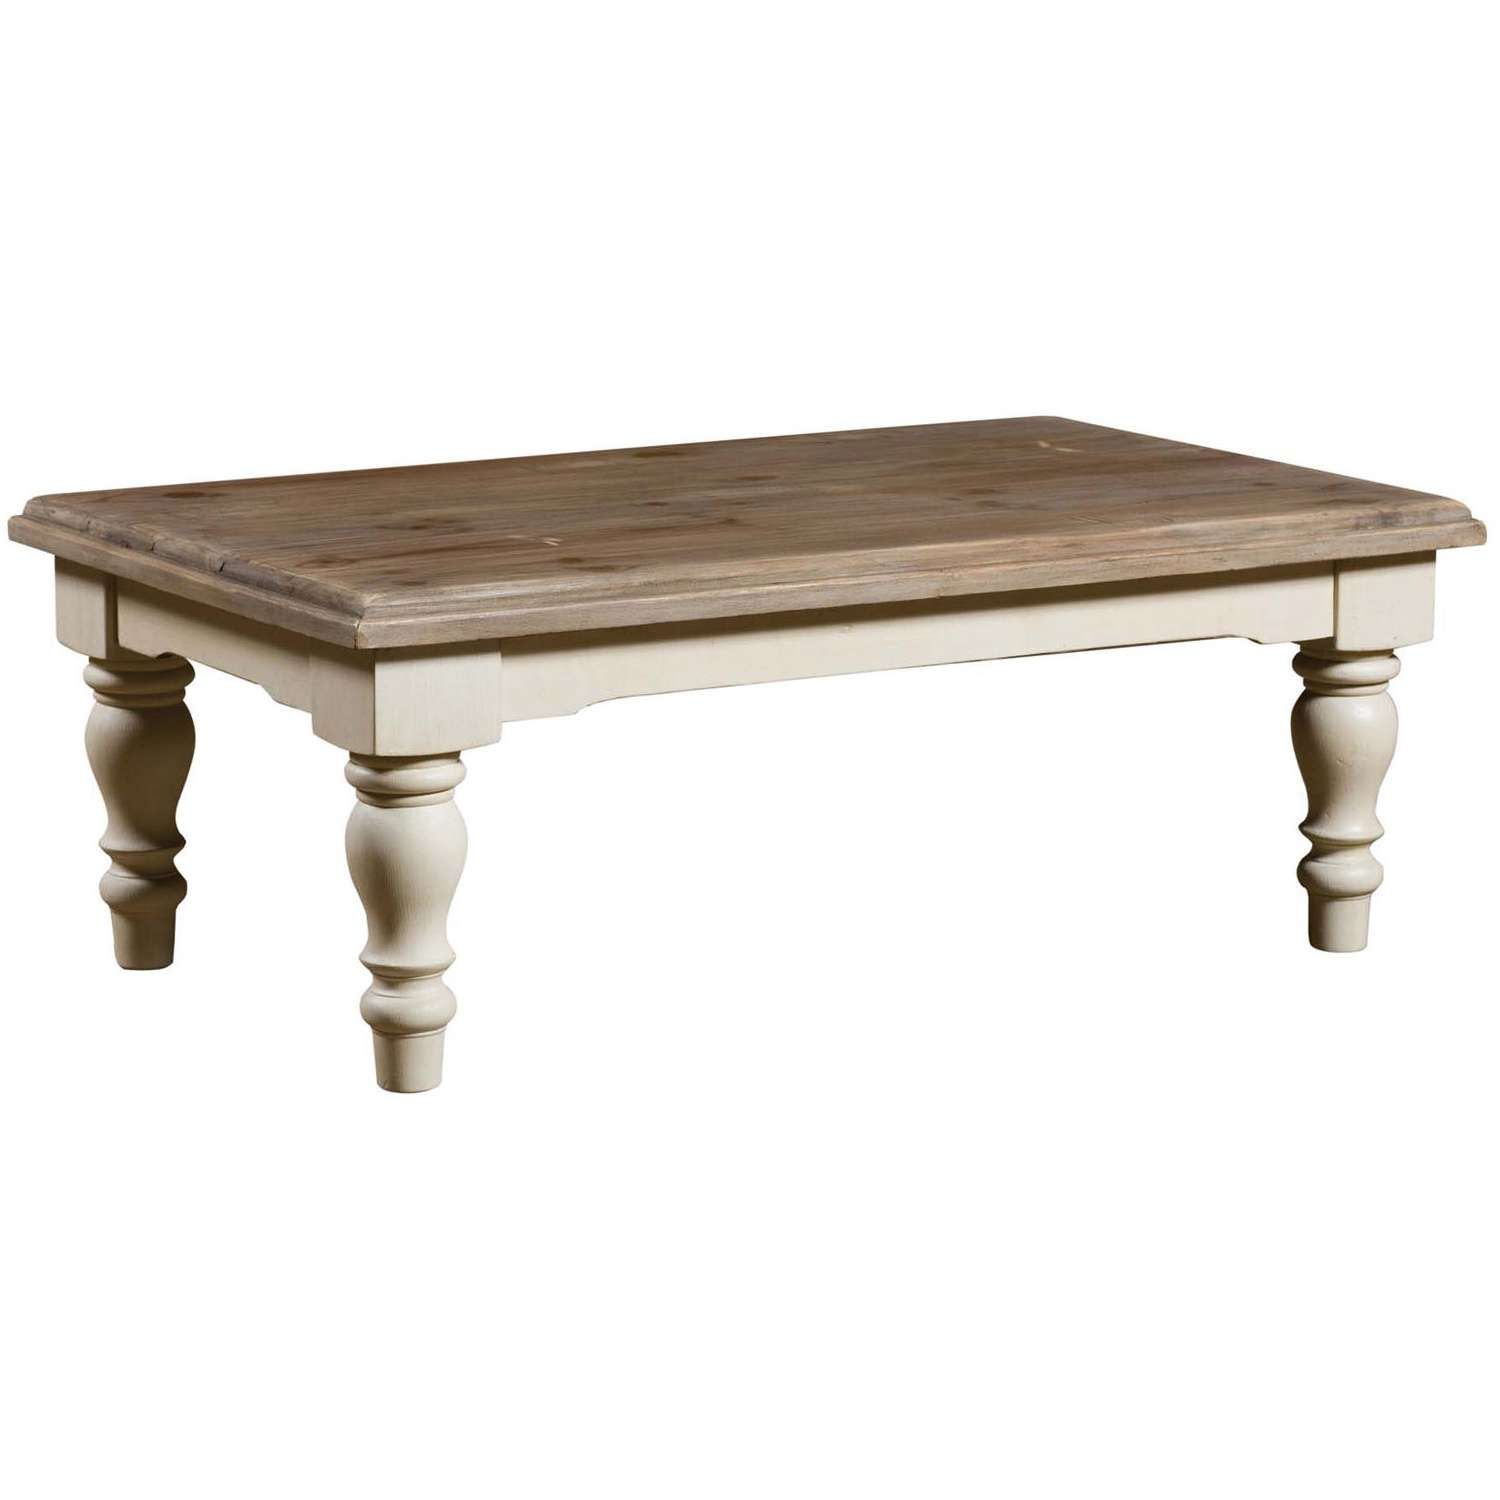 Most Recent Country French Coffee Tables Pertaining To Beige And Brown Rectangle Wood French Country Coffee Table Designs (View 10 of 20)